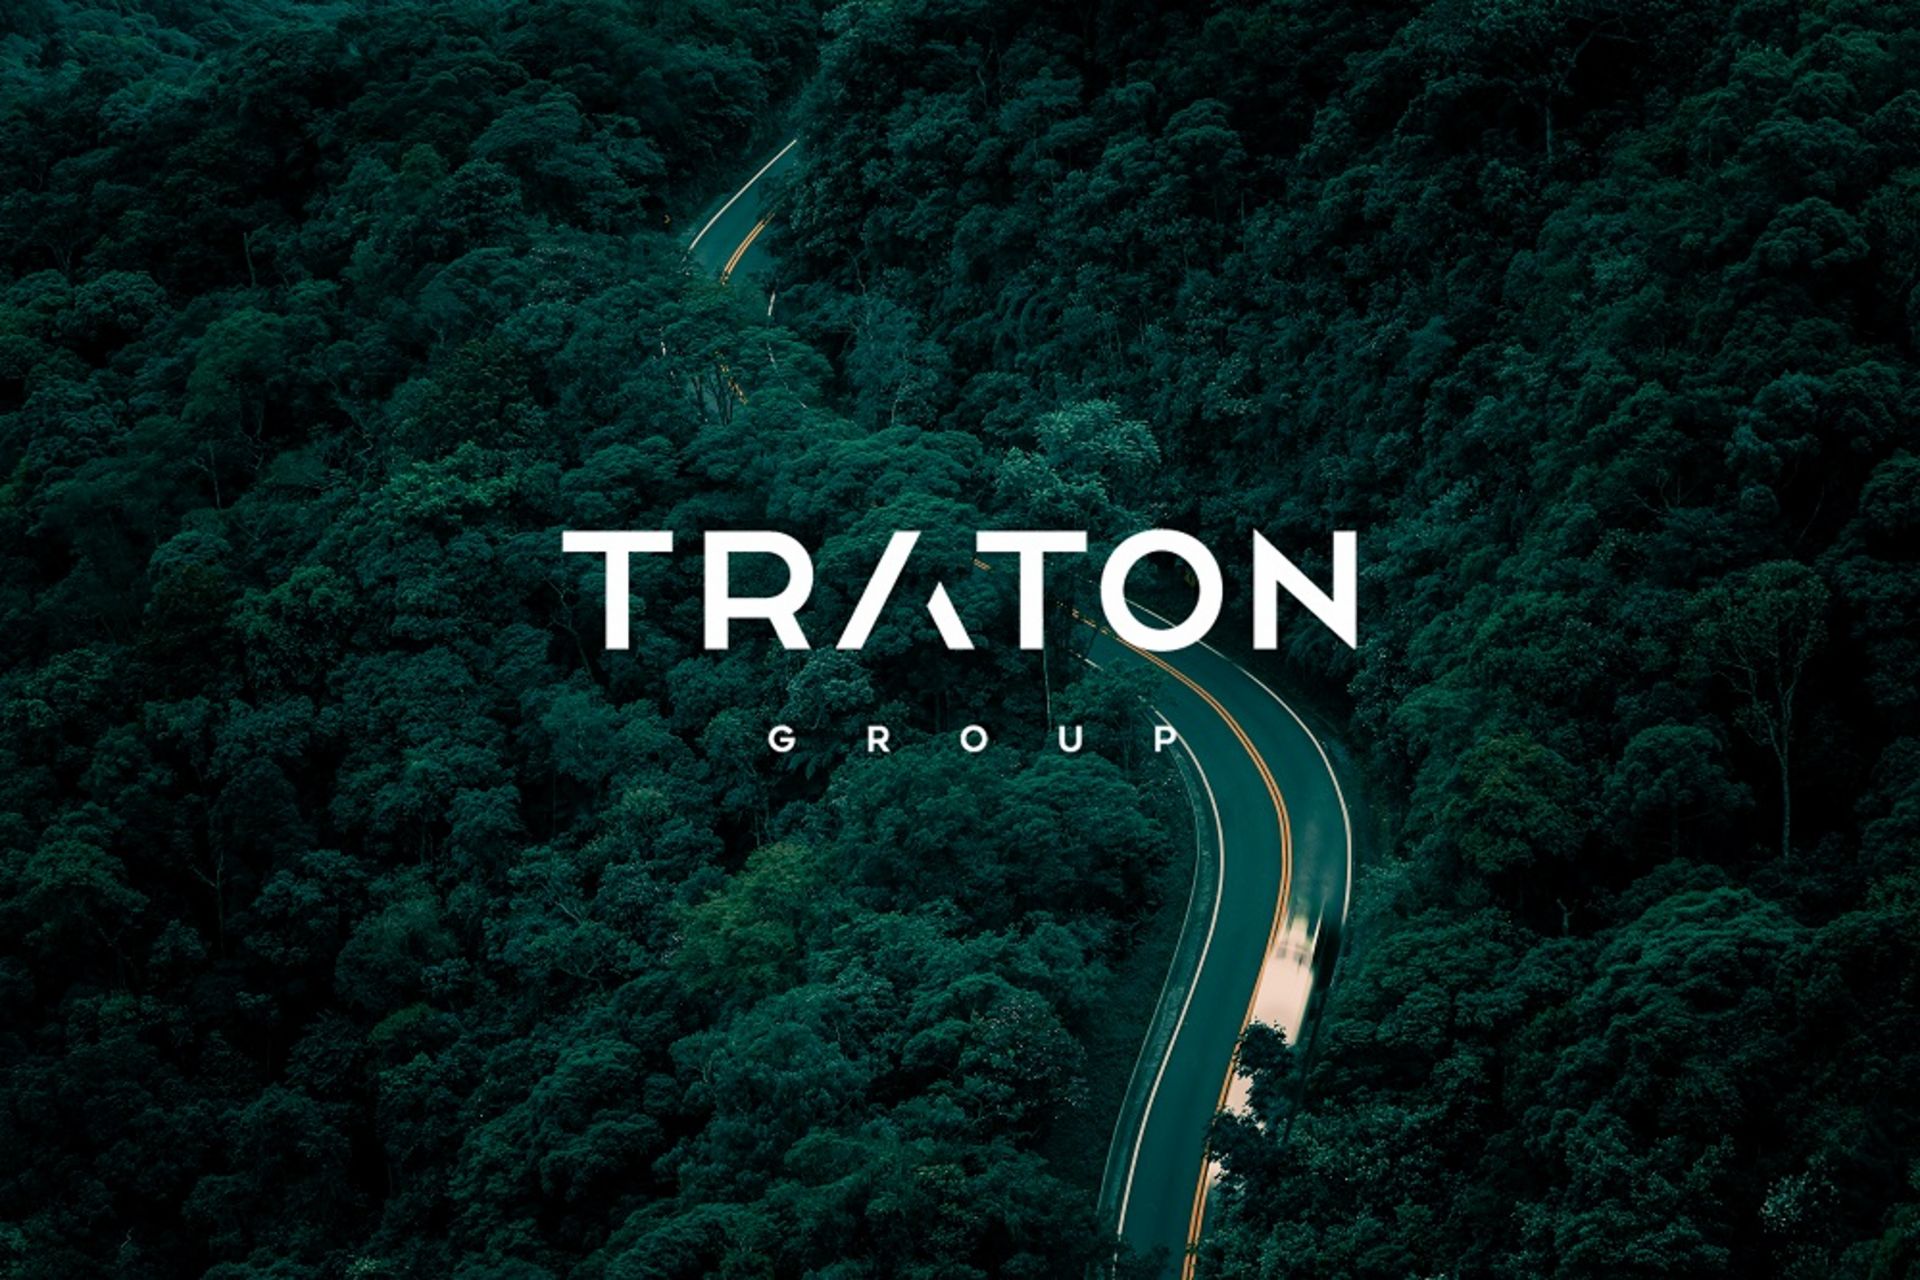  traton-group-pm-header-no-index